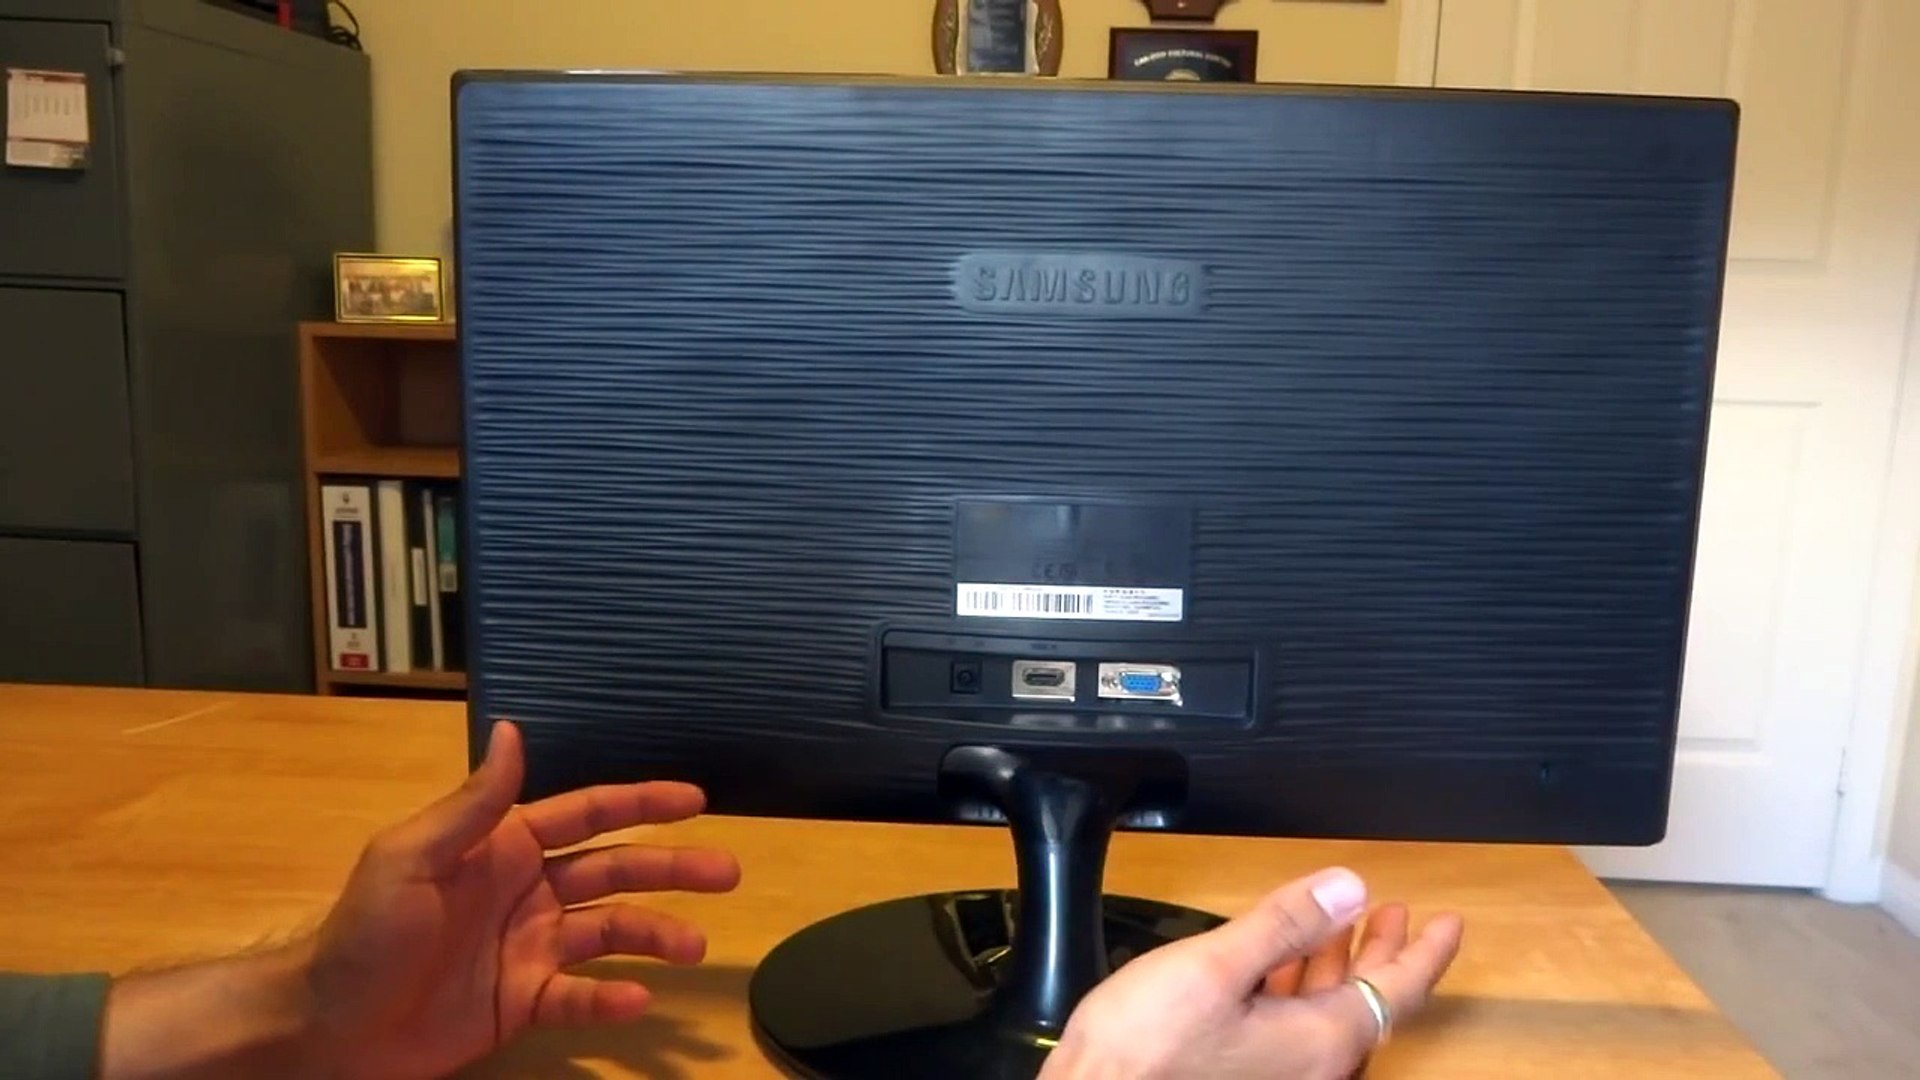 Samsung S22B300H 21.5" LED Monitor Review - video Dailymotion